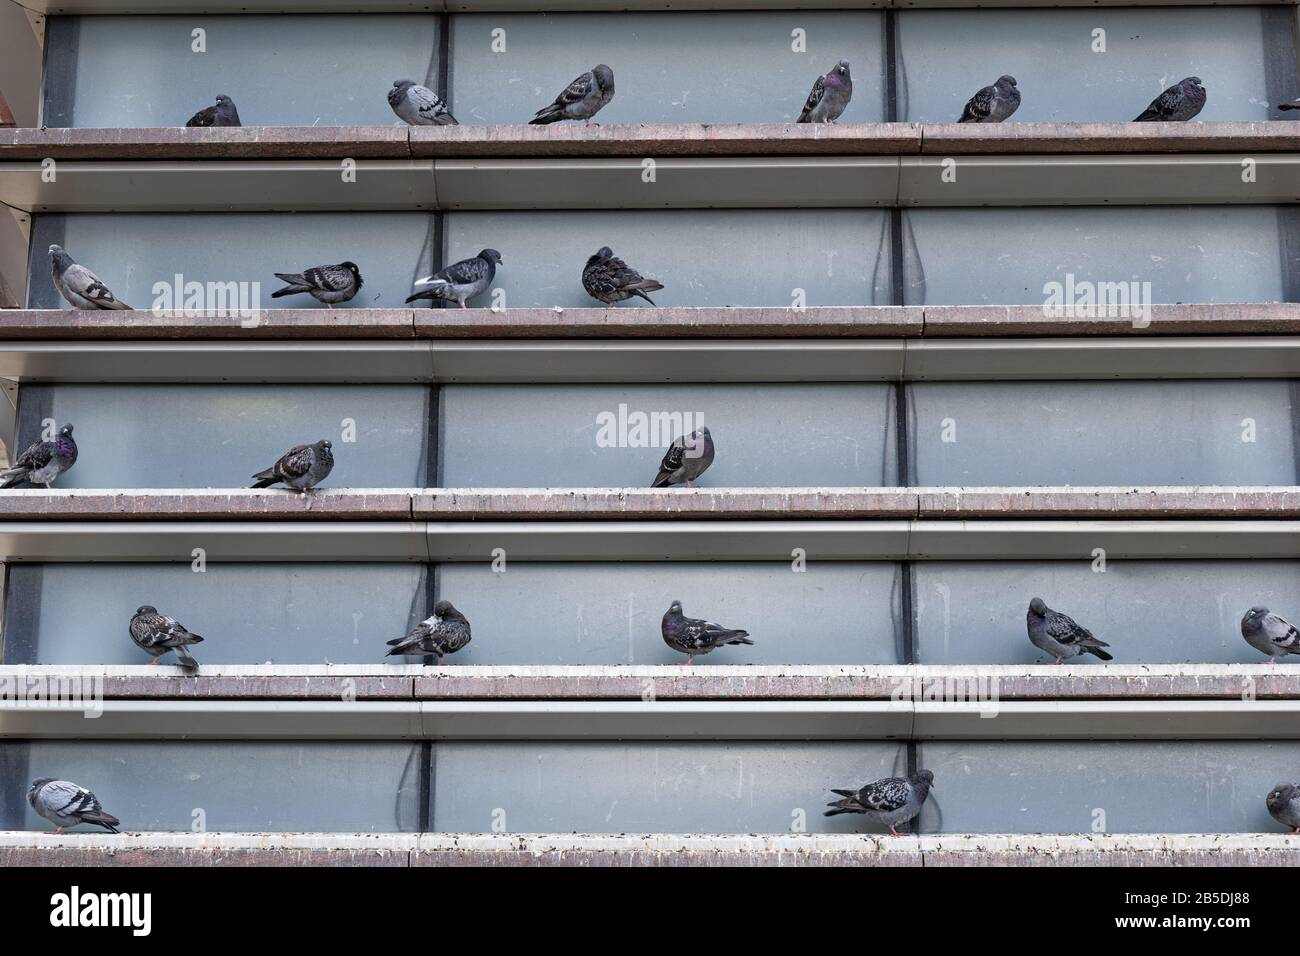 Group of domestic pigeons (Columba livia domestica) sitting and resting building exterior shelves in the city. Stock Photo